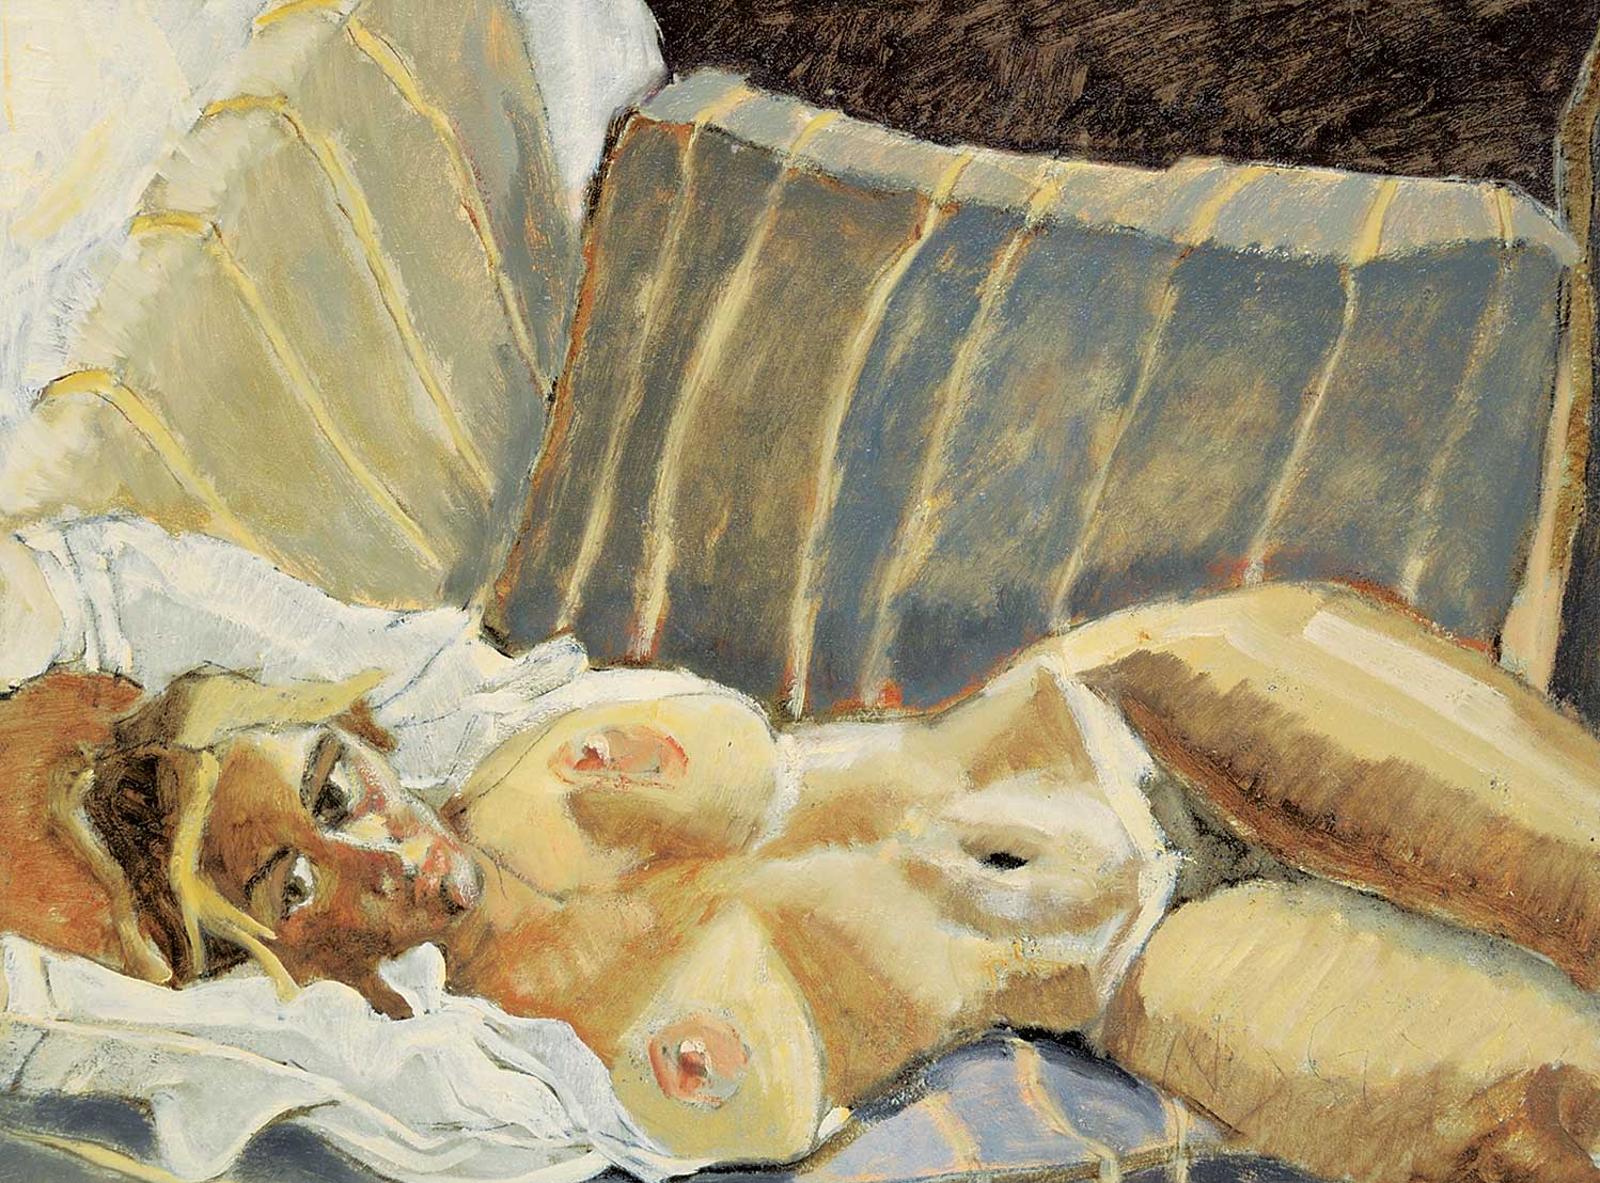 Gabor L. Nagy (1945) - Untitled - Reclining Figure on the Couch